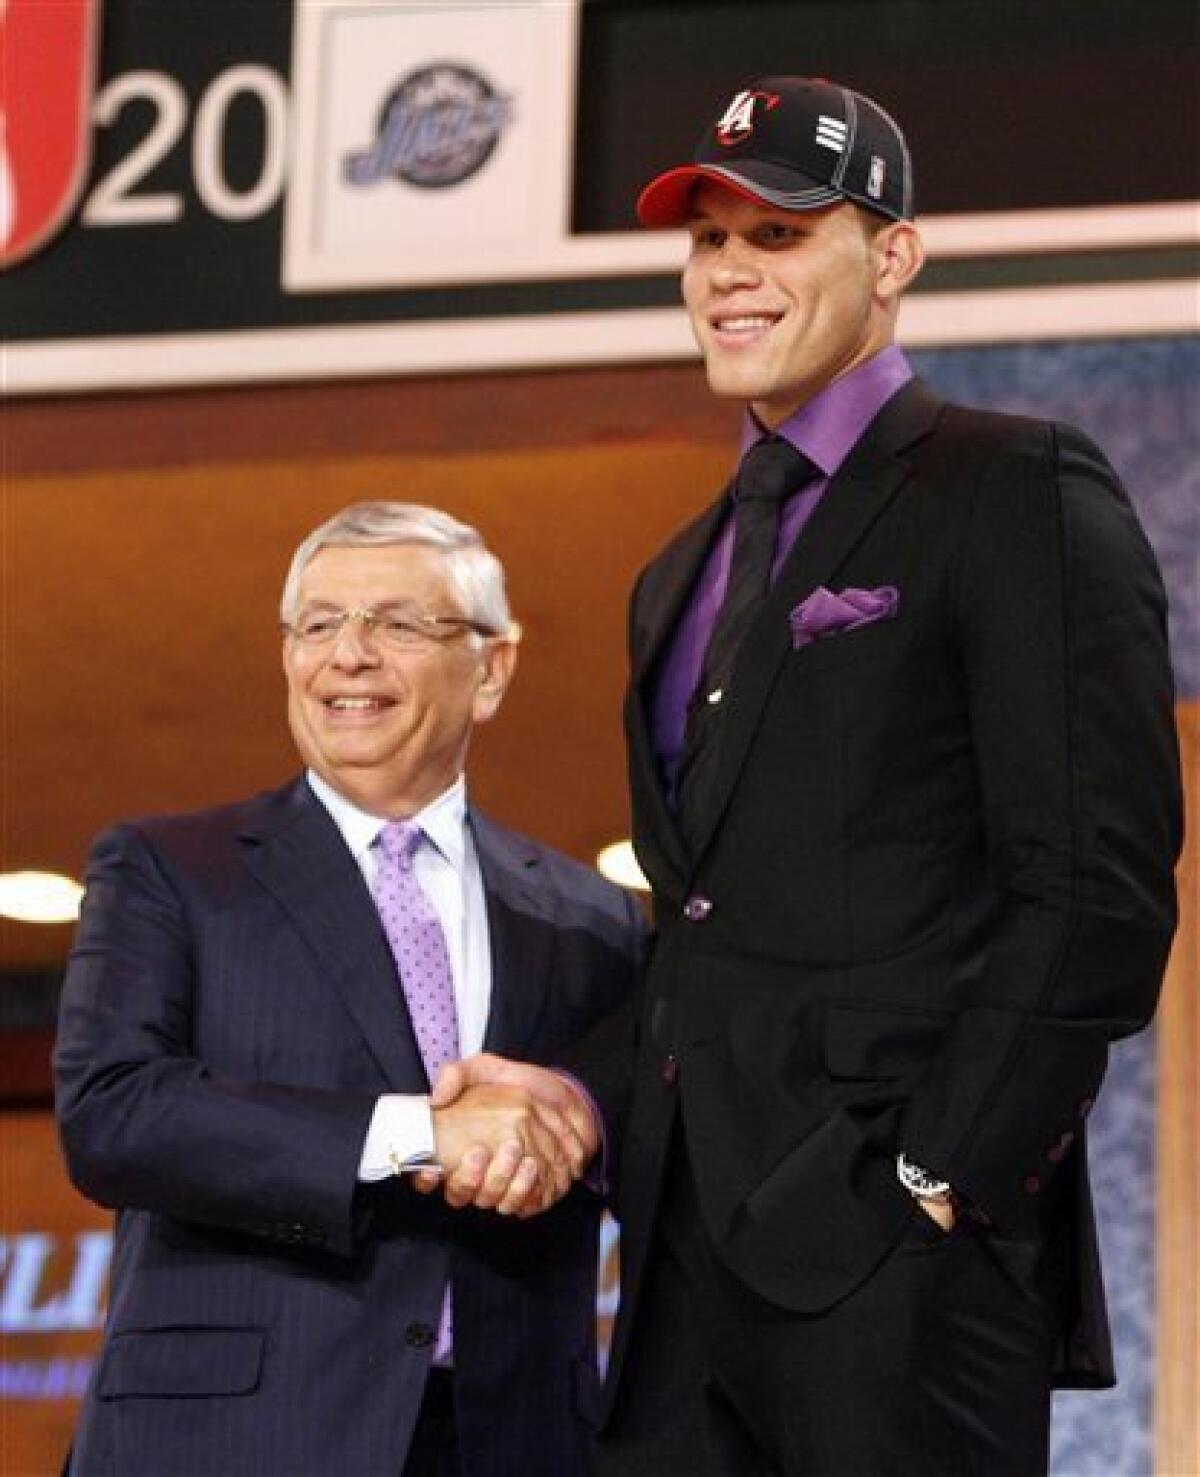 LA Clippers: University of Oklahoma To Name Center After Blake Griffin